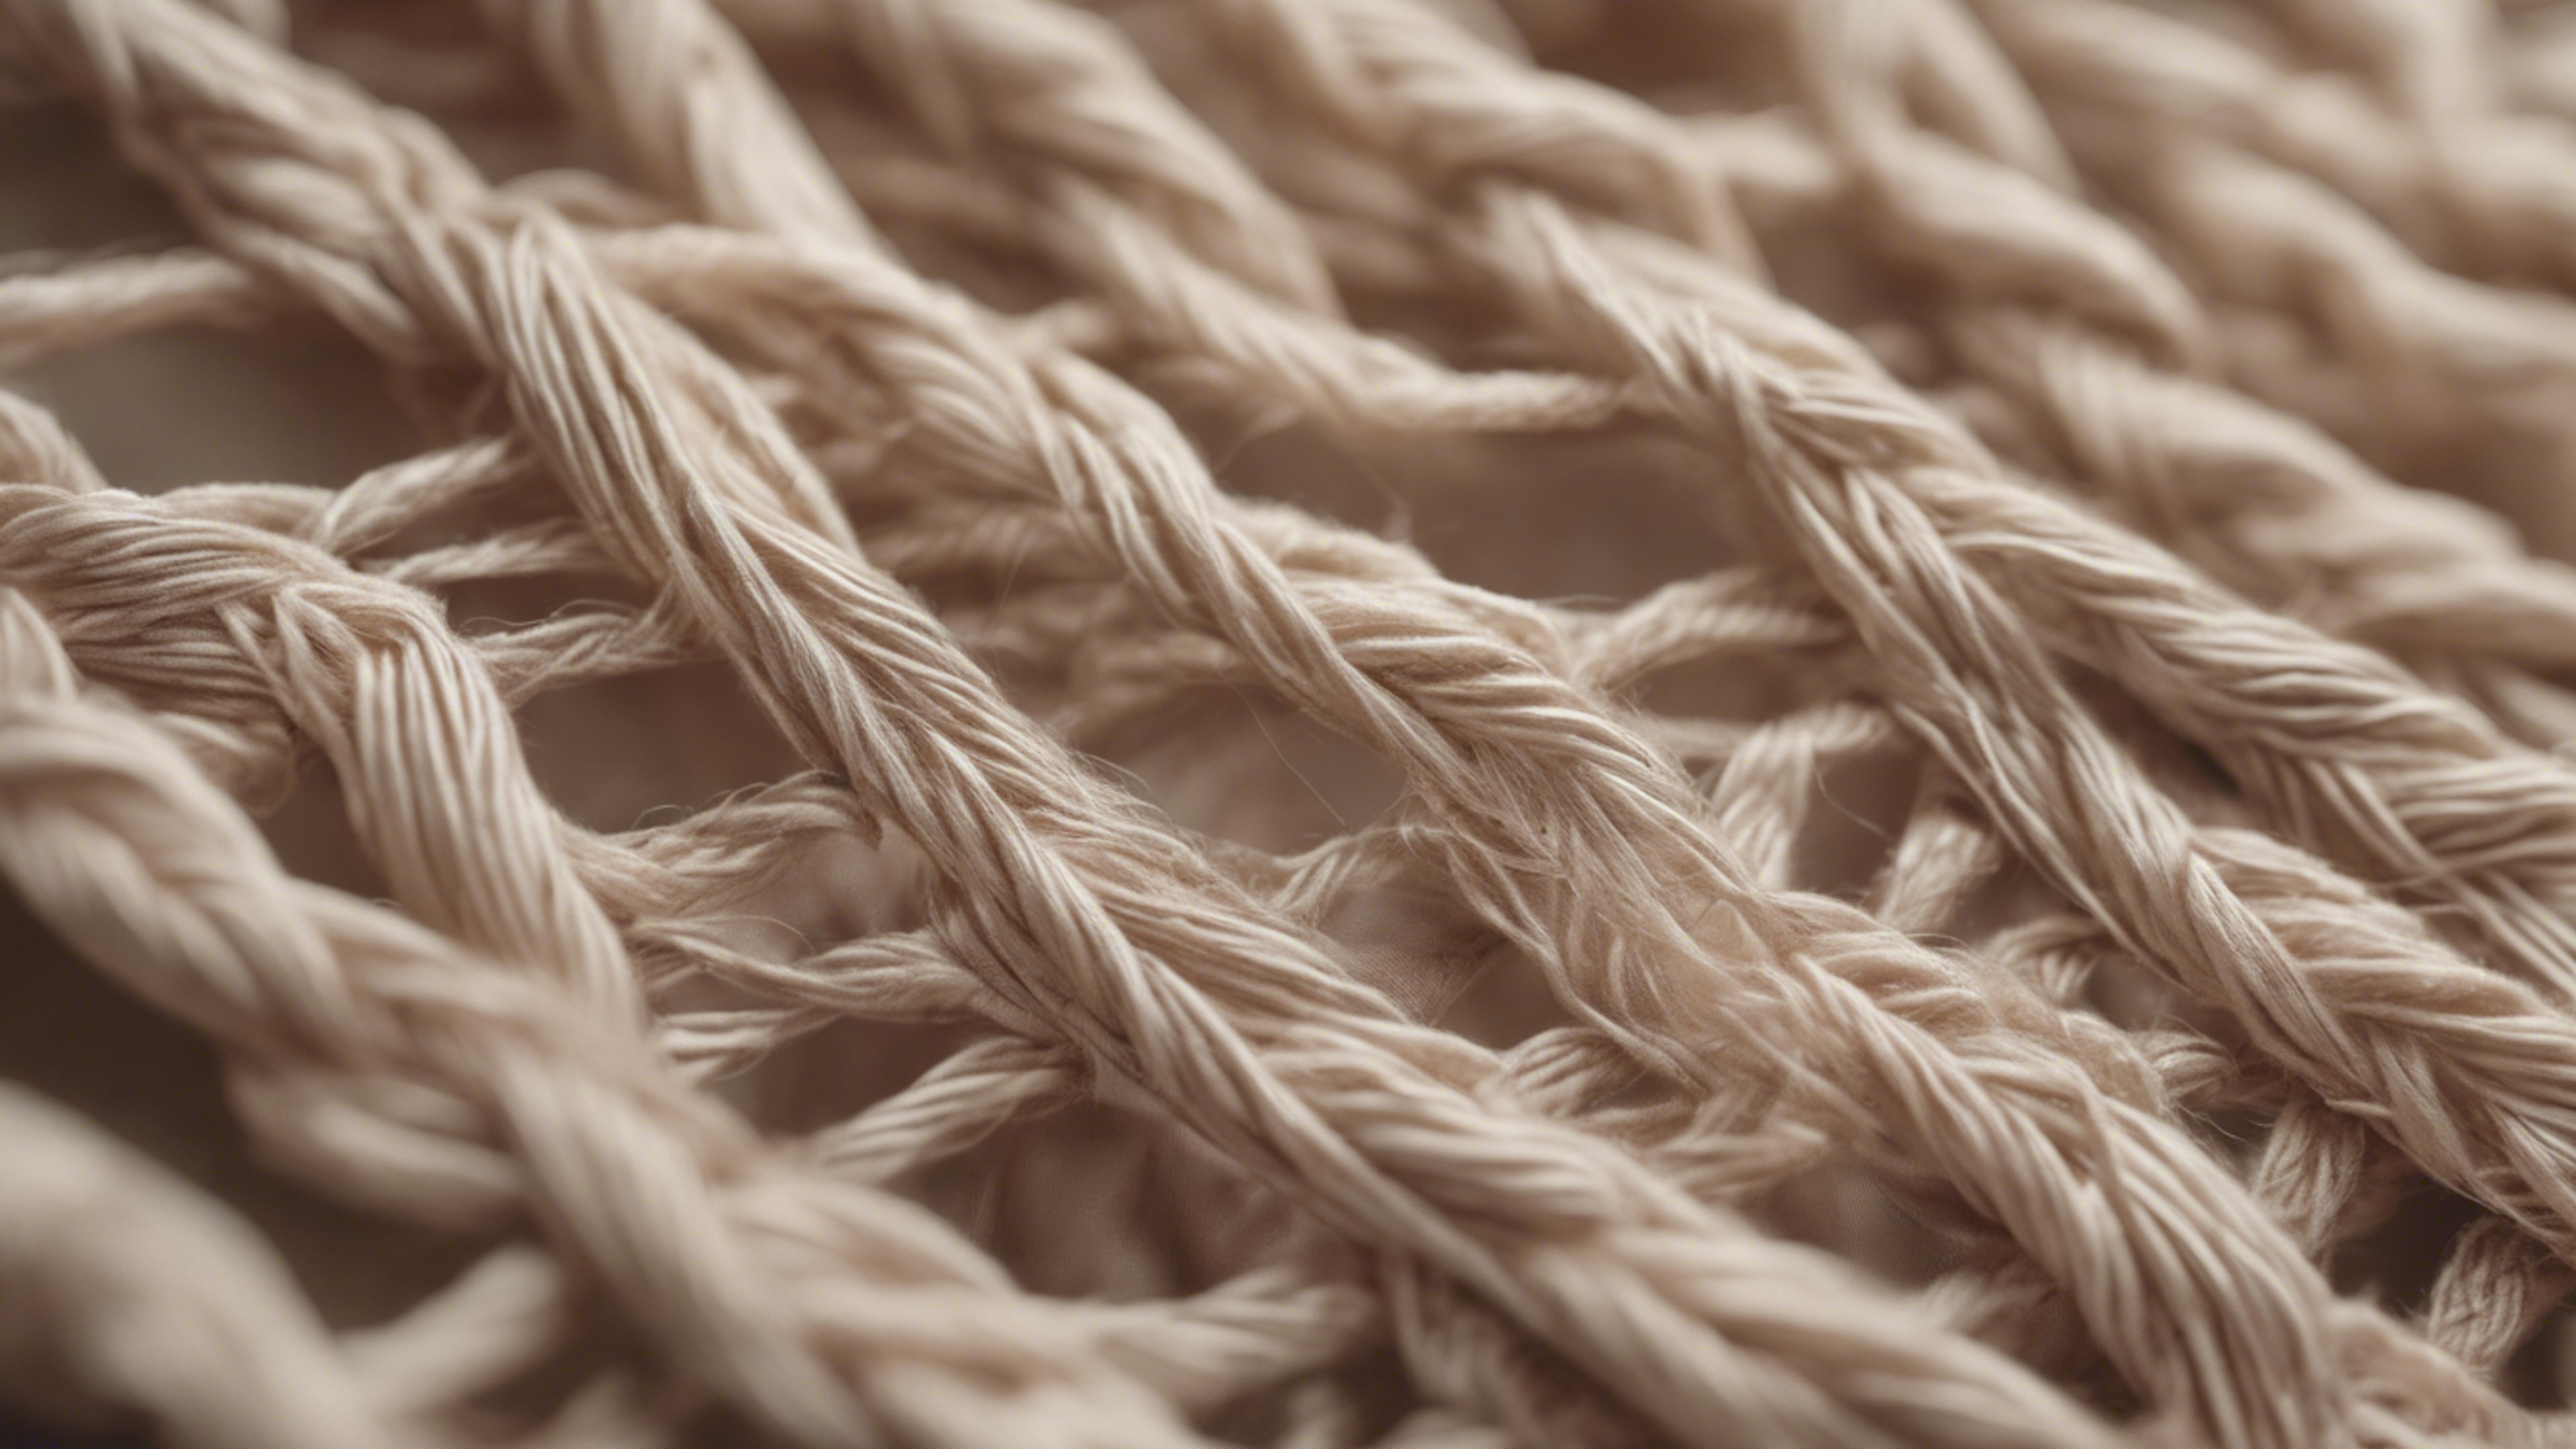 A close-up of cool beige threads interweaving to form a unique, patterned fabric. Тапет[e47f0bd142b54d48a5a0]